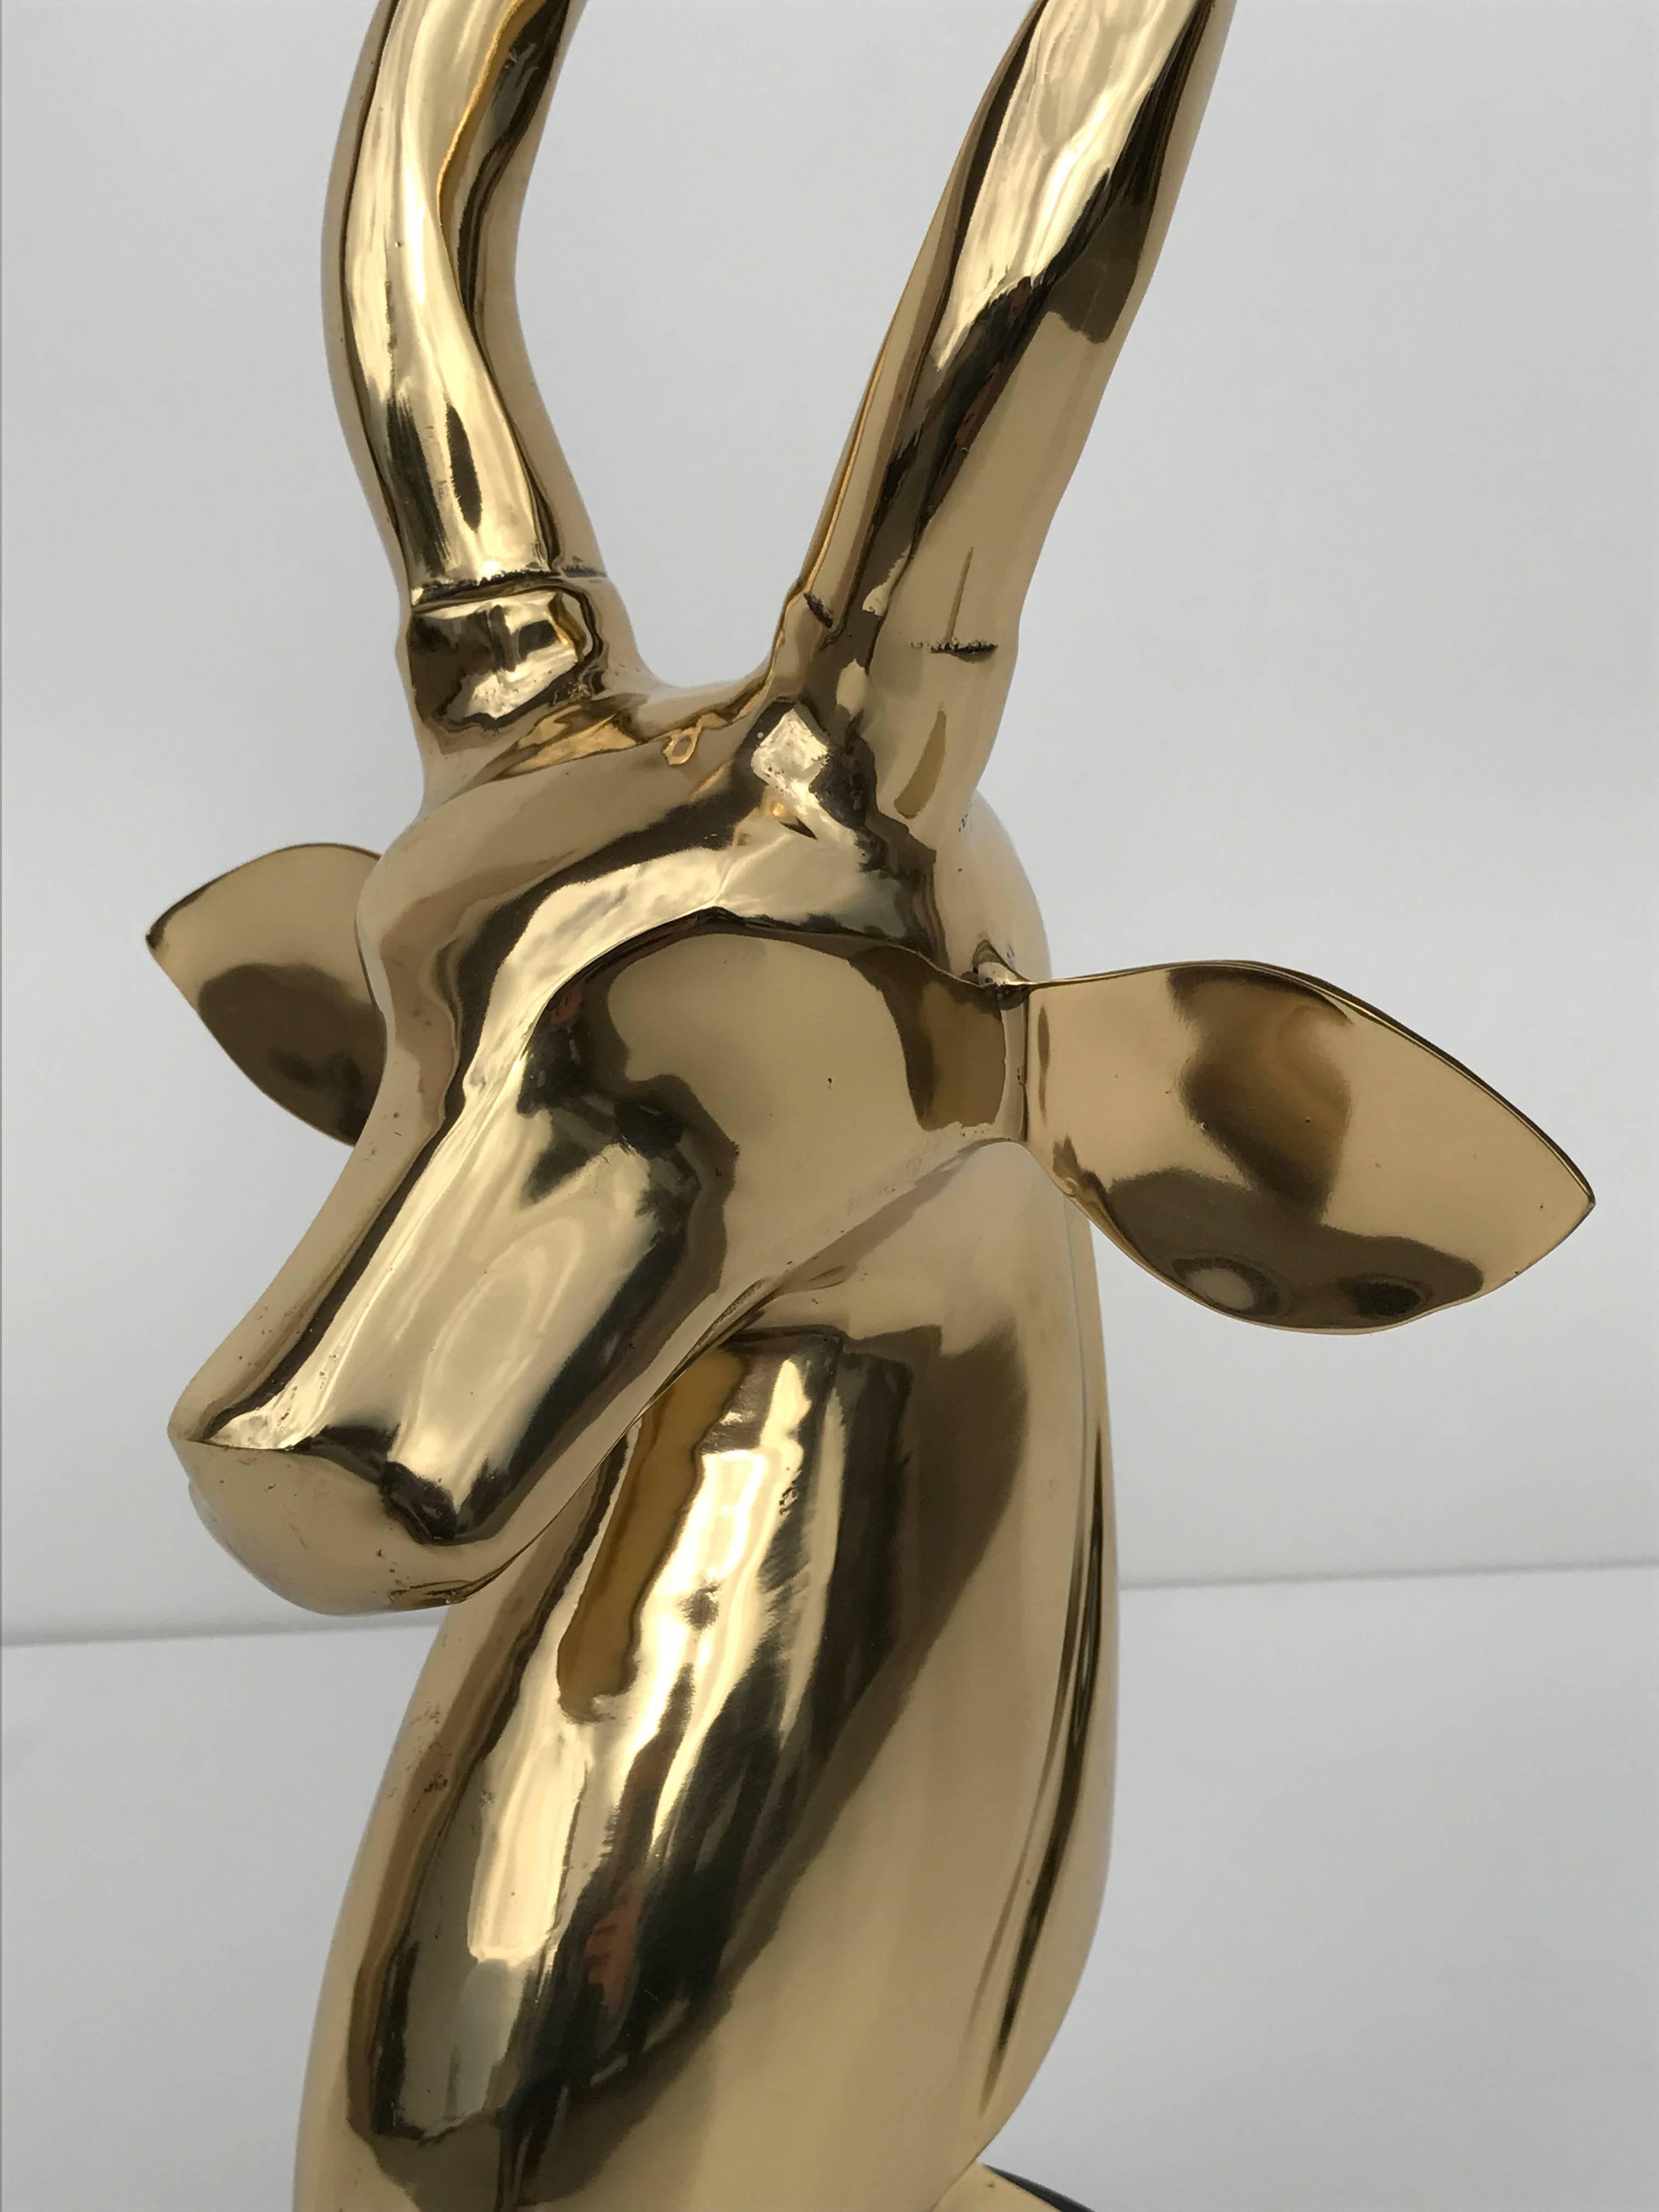 Unknown Polished Brass Kudu or Impala Sculpture Bust on Black Lucite Base